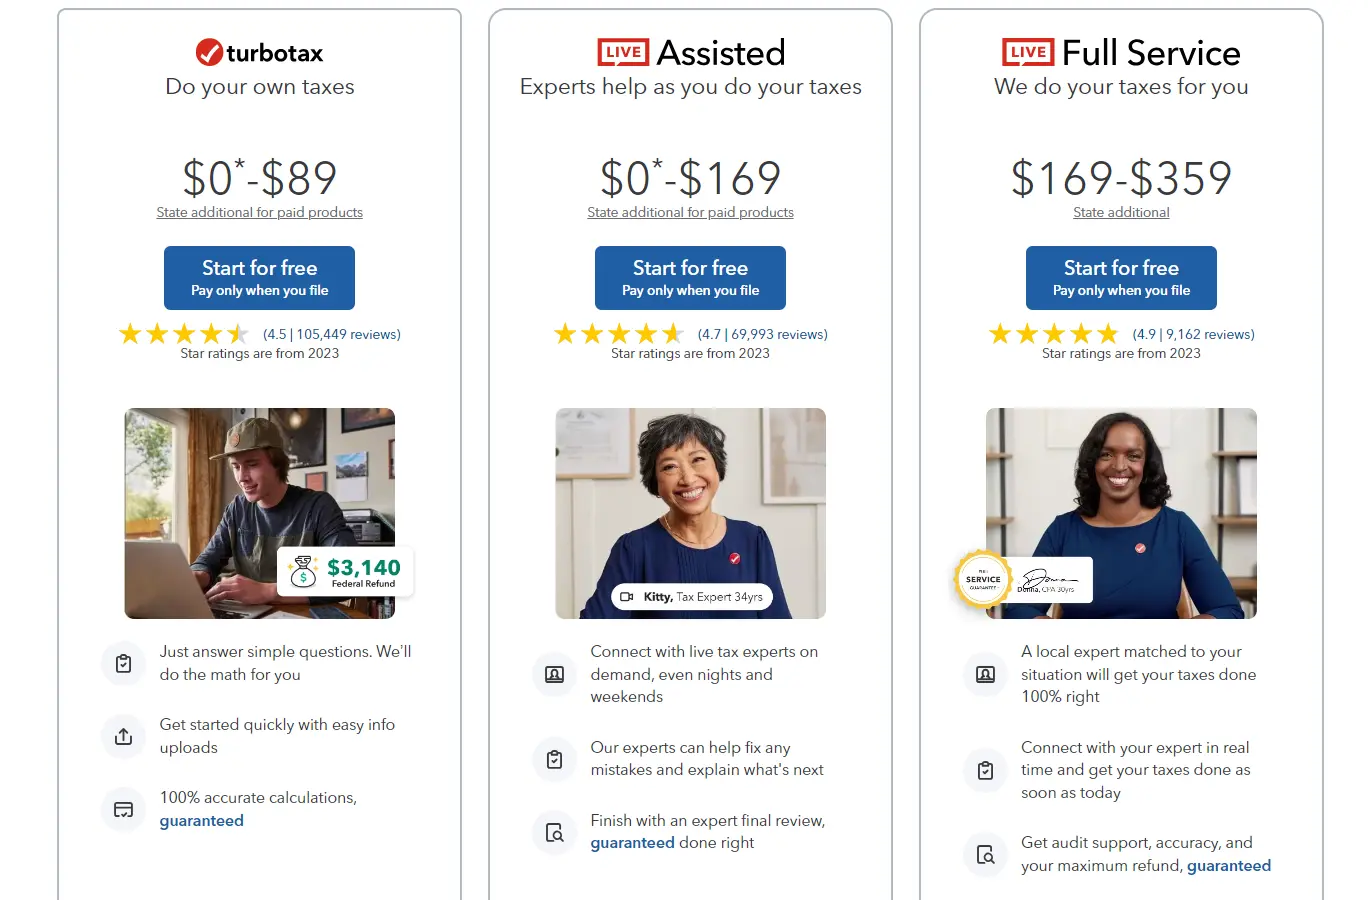 pricing and plans of turbotax